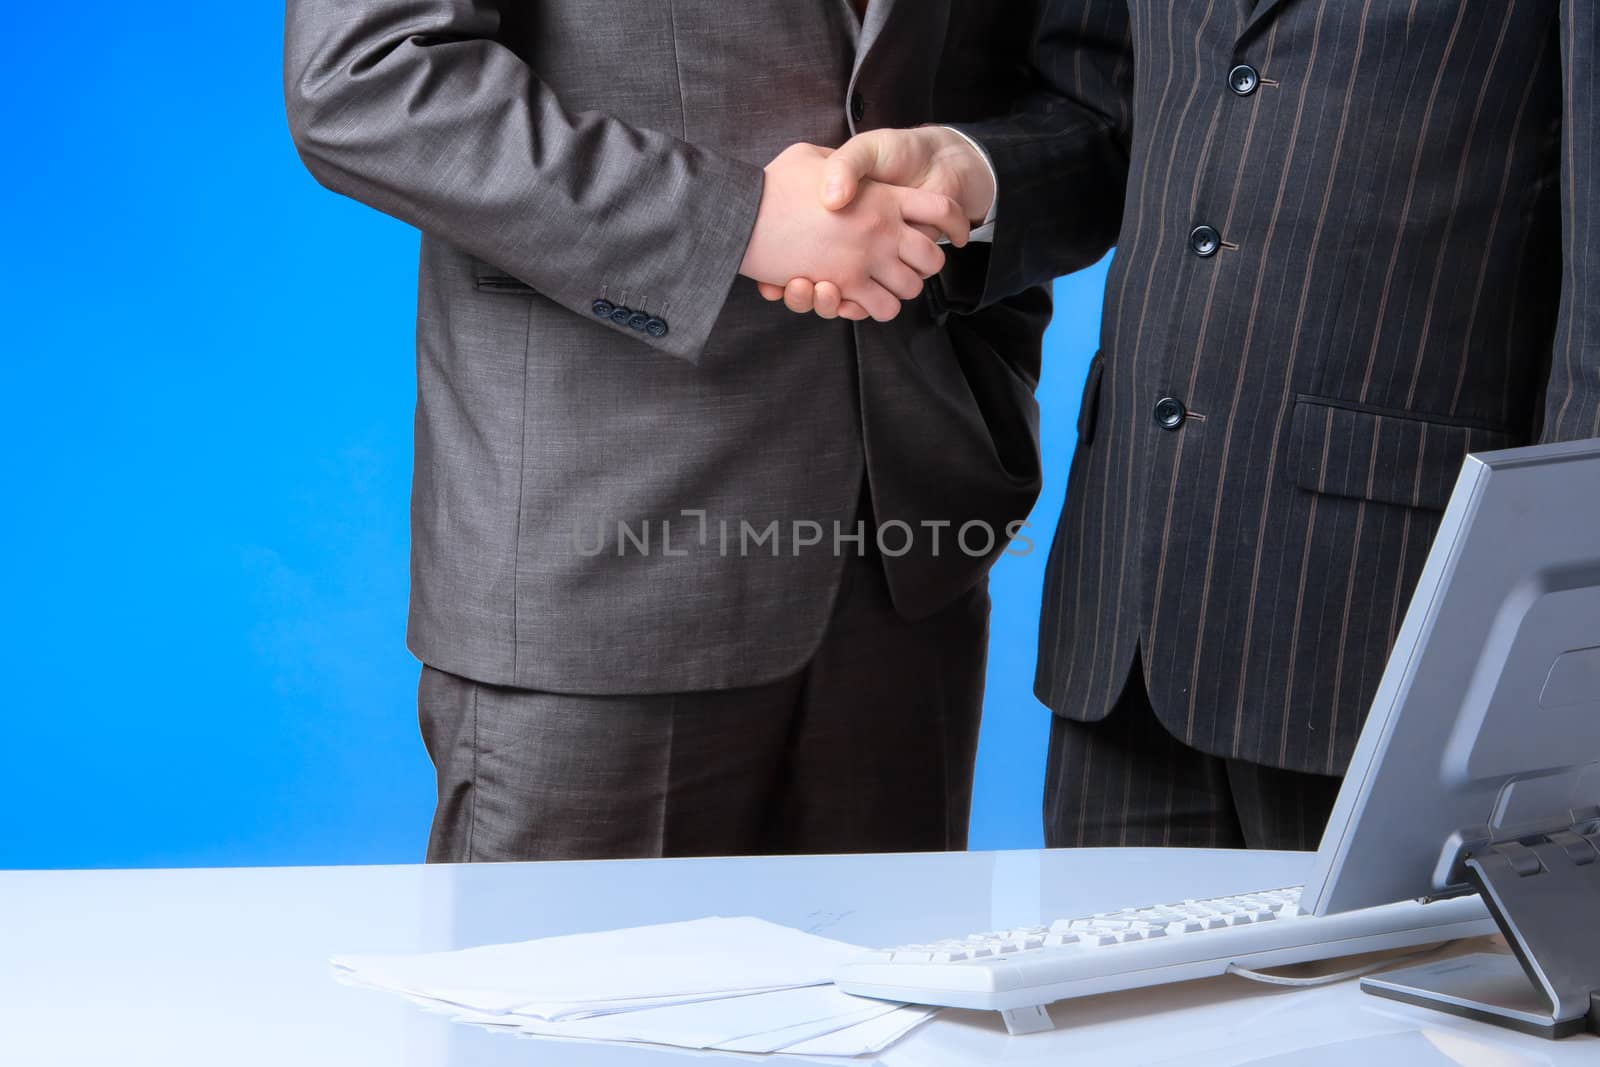 Two business men shake hands each other